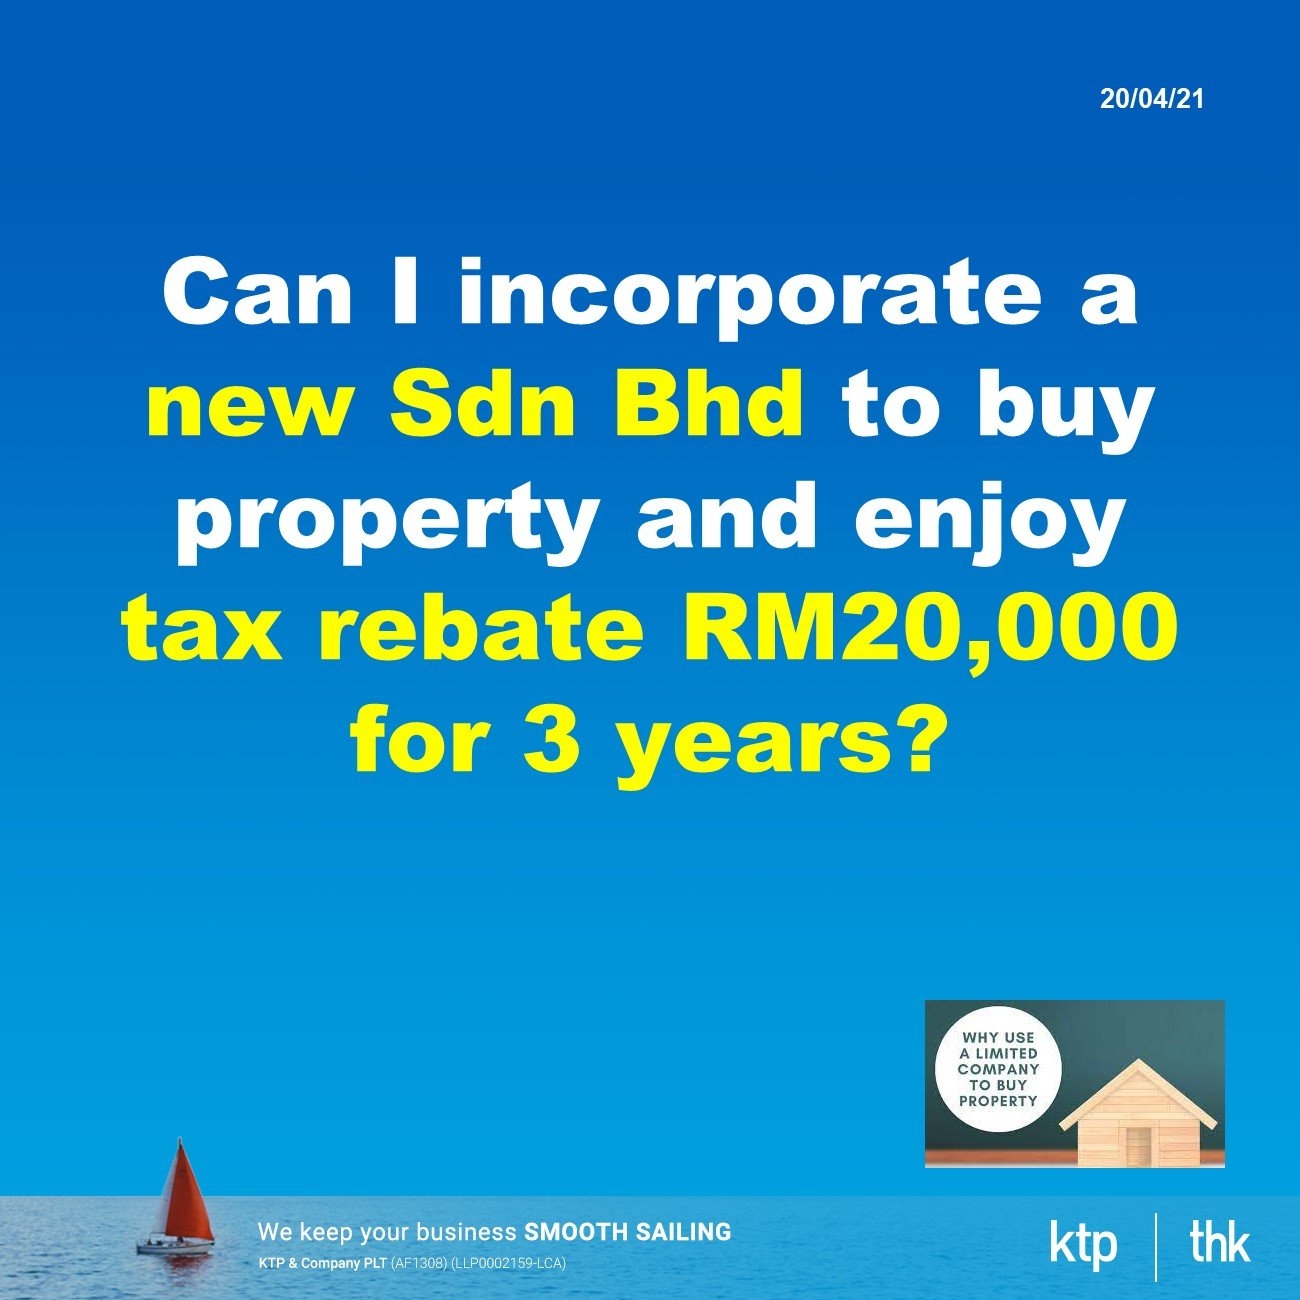 tax-rebate-rm20-000-x-3-years-on-investment-holding-company-apr-20